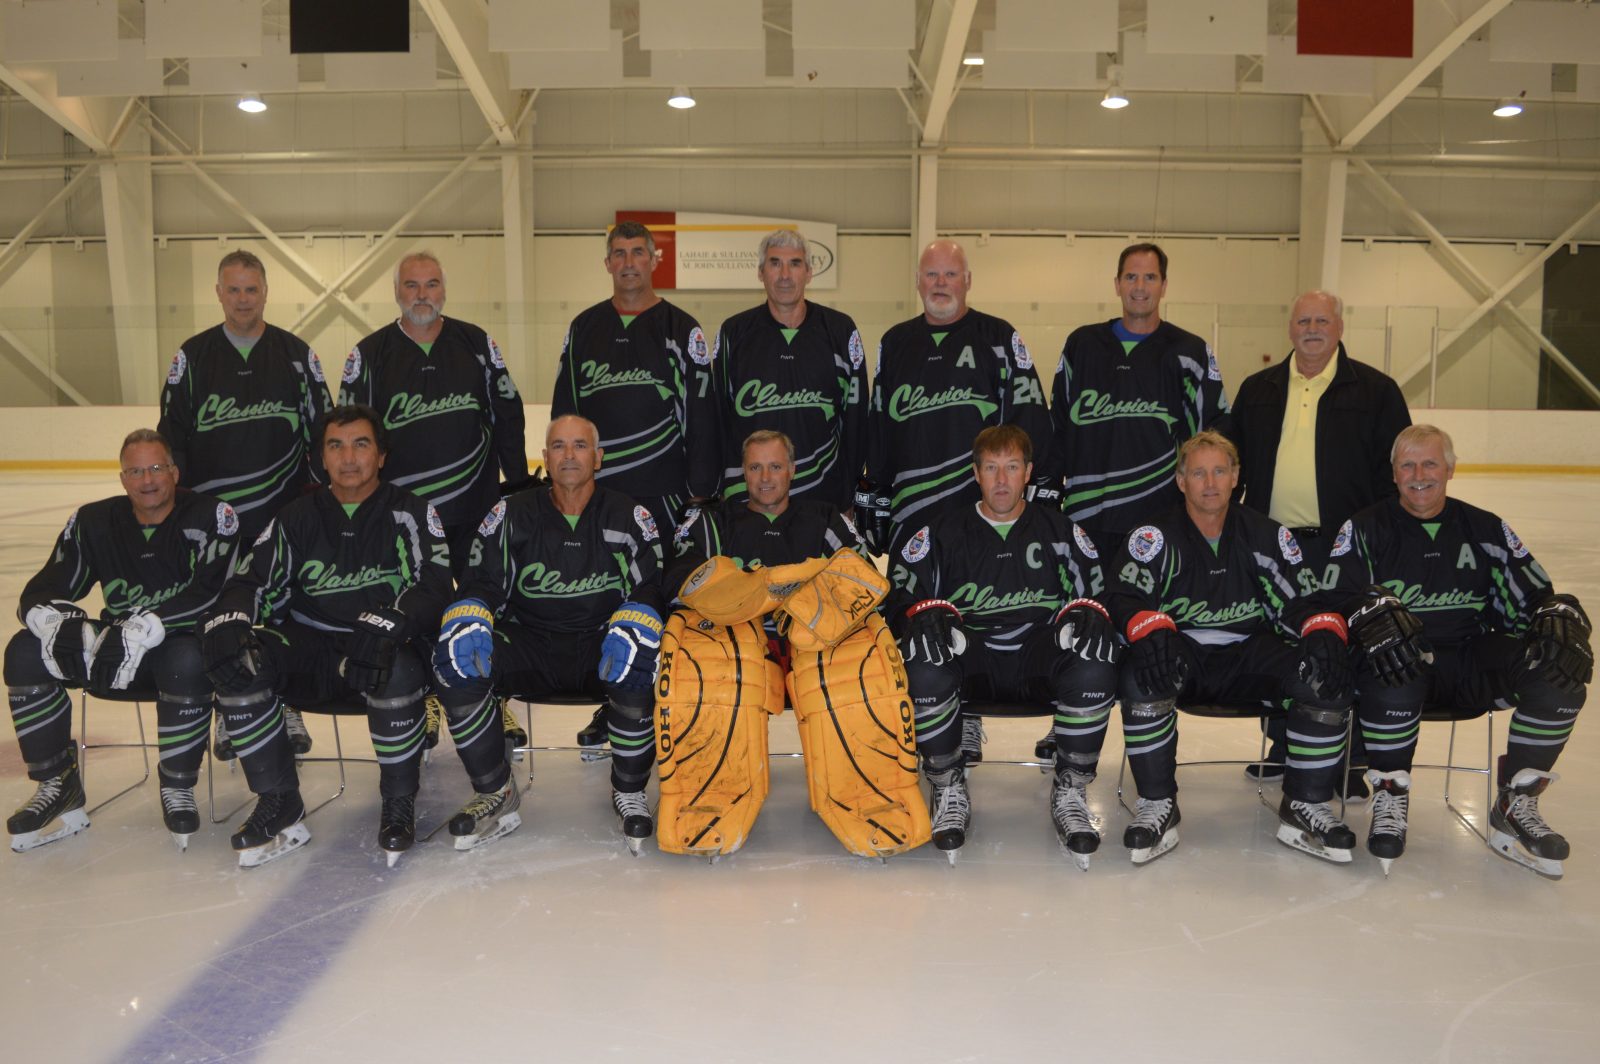 Cornwall Classics and Laframboise Group to represent Ontario on Hockey’s National stage